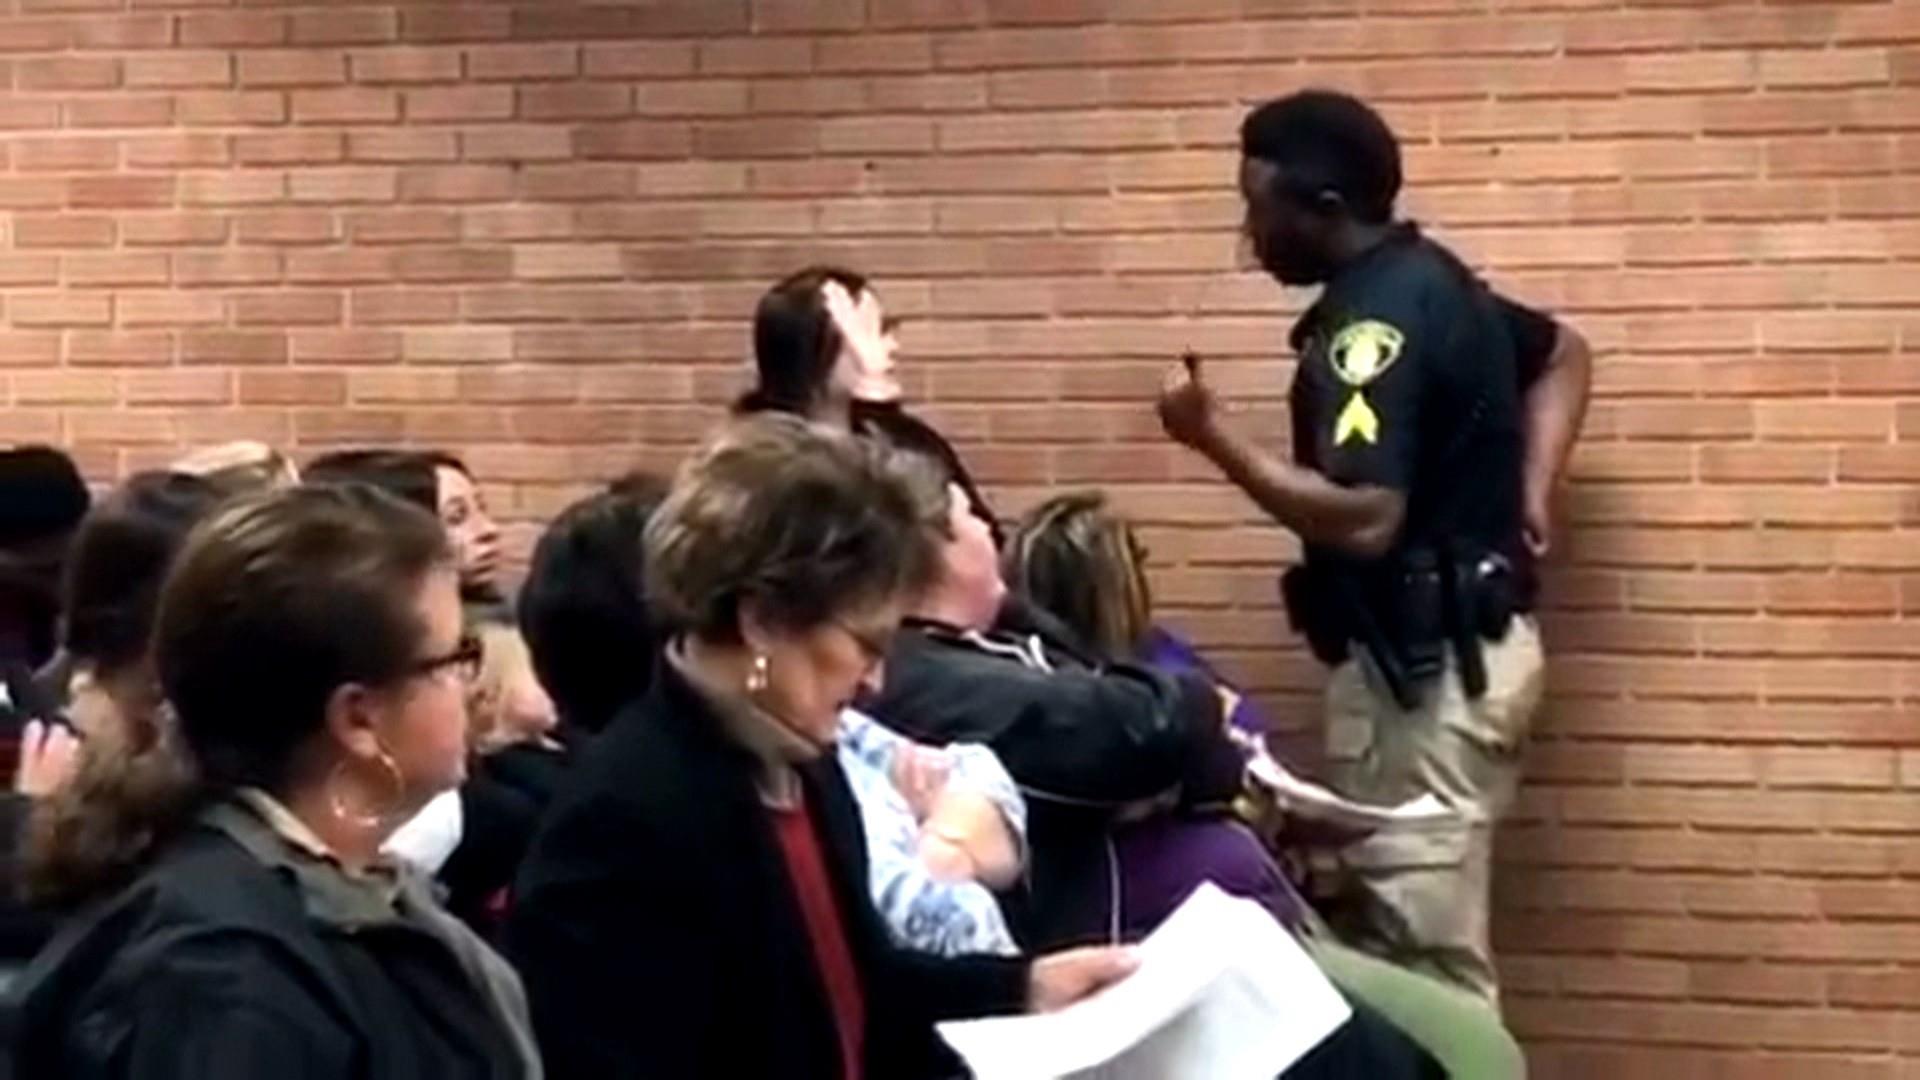 Teacher handcuffed after speaking out at meeting, caught on video.